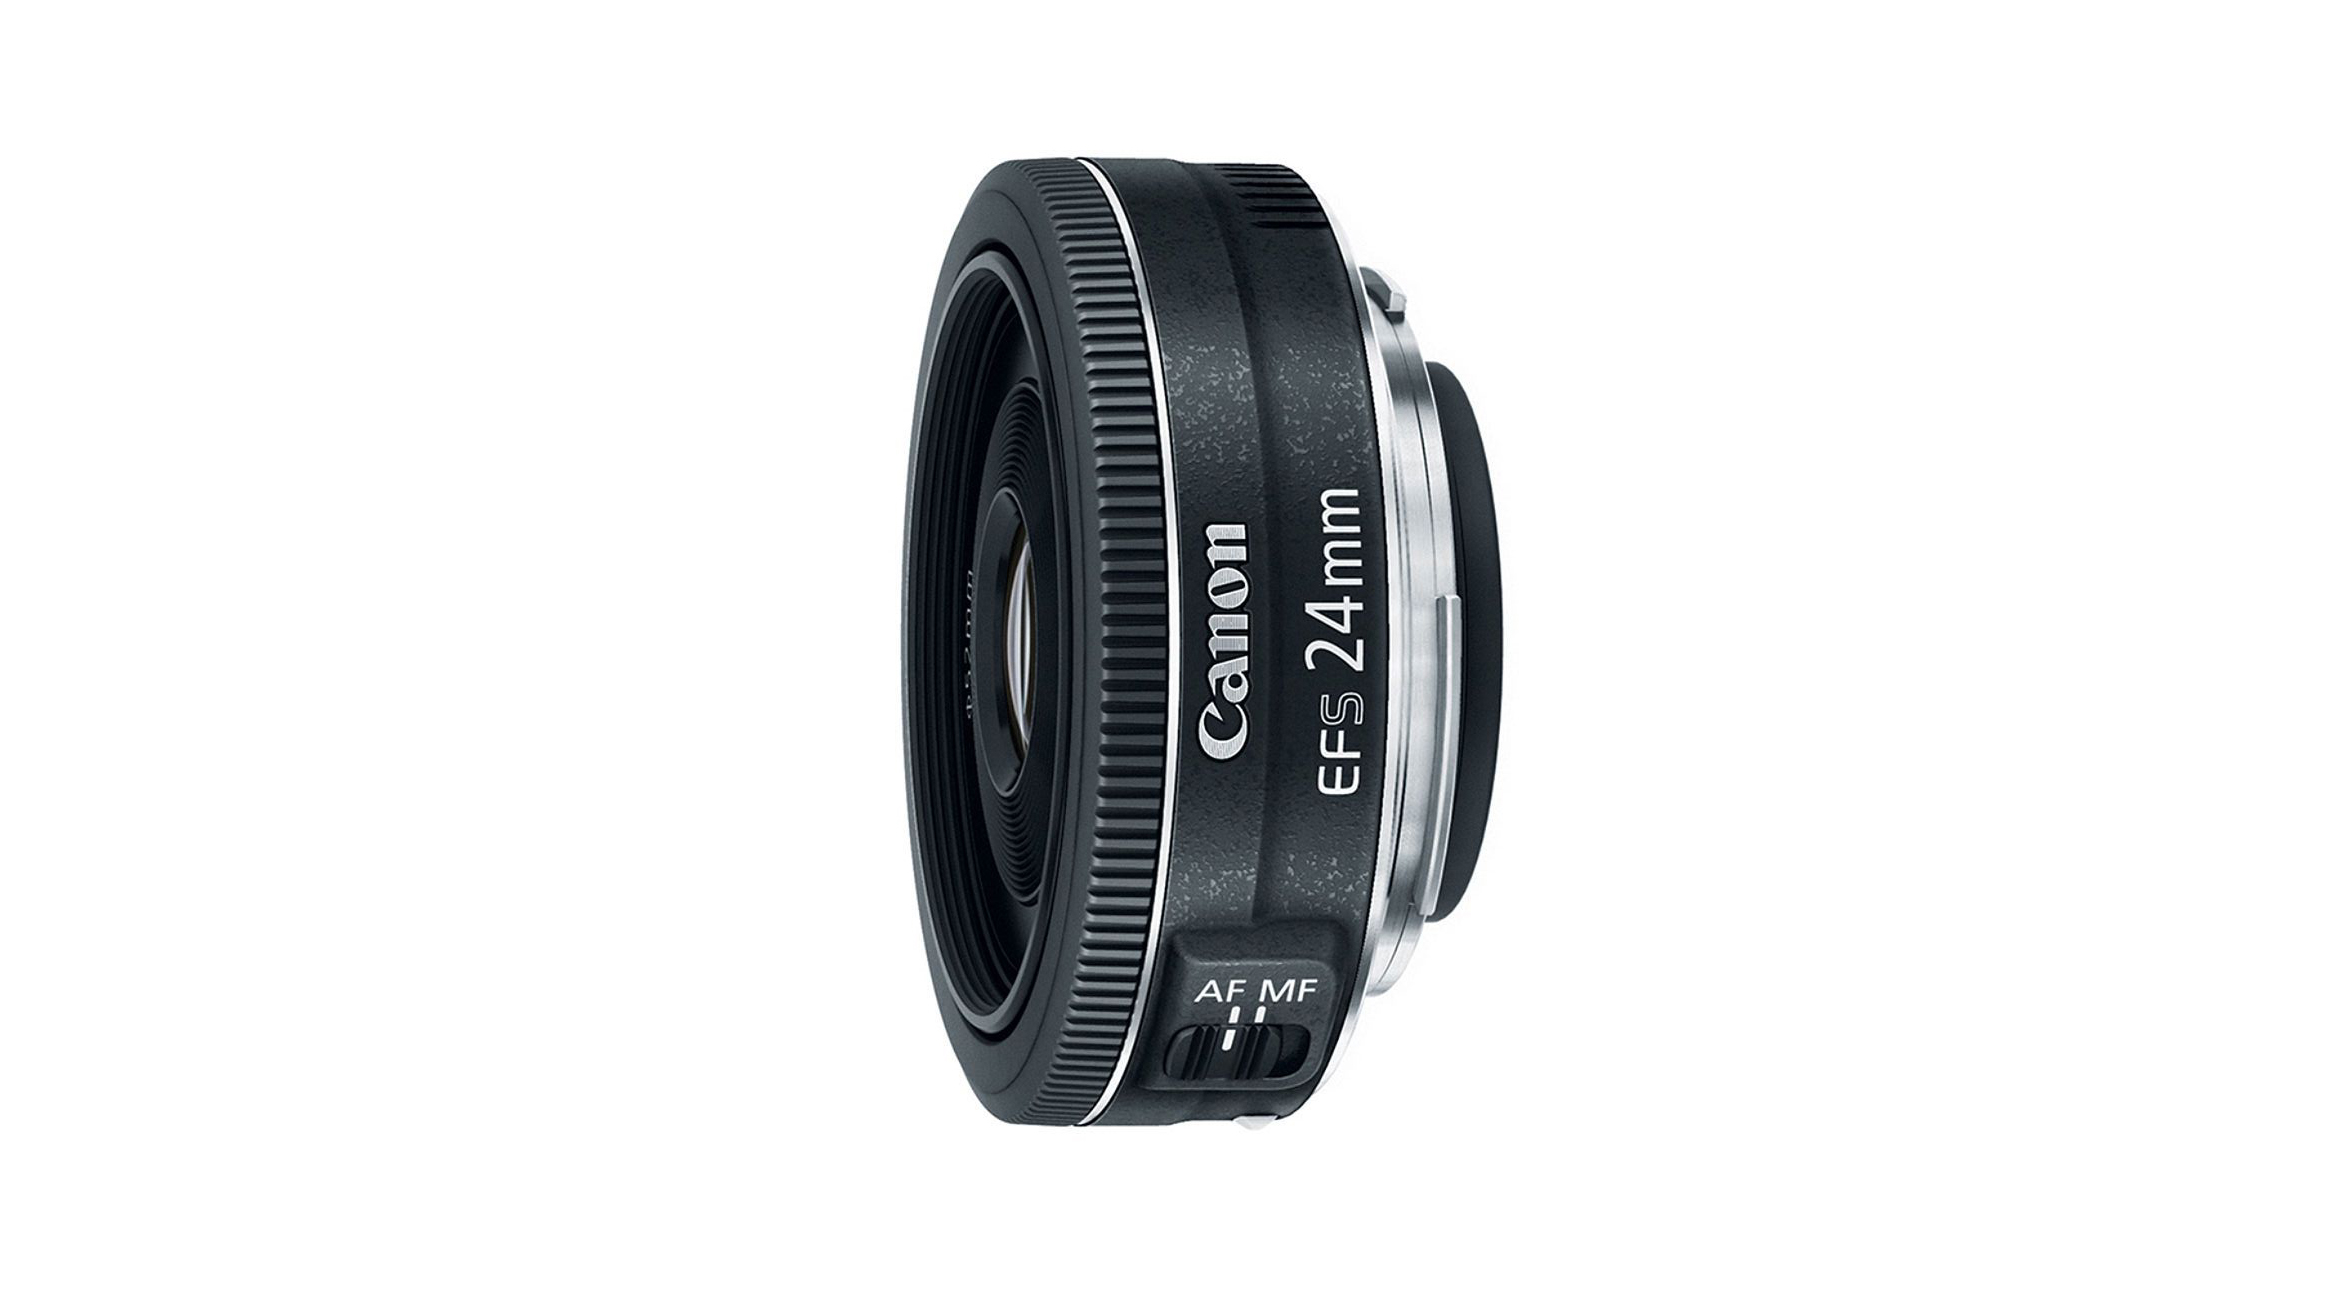 Best lens for street photography: Canon EF-S 24mm f/2.8 STM